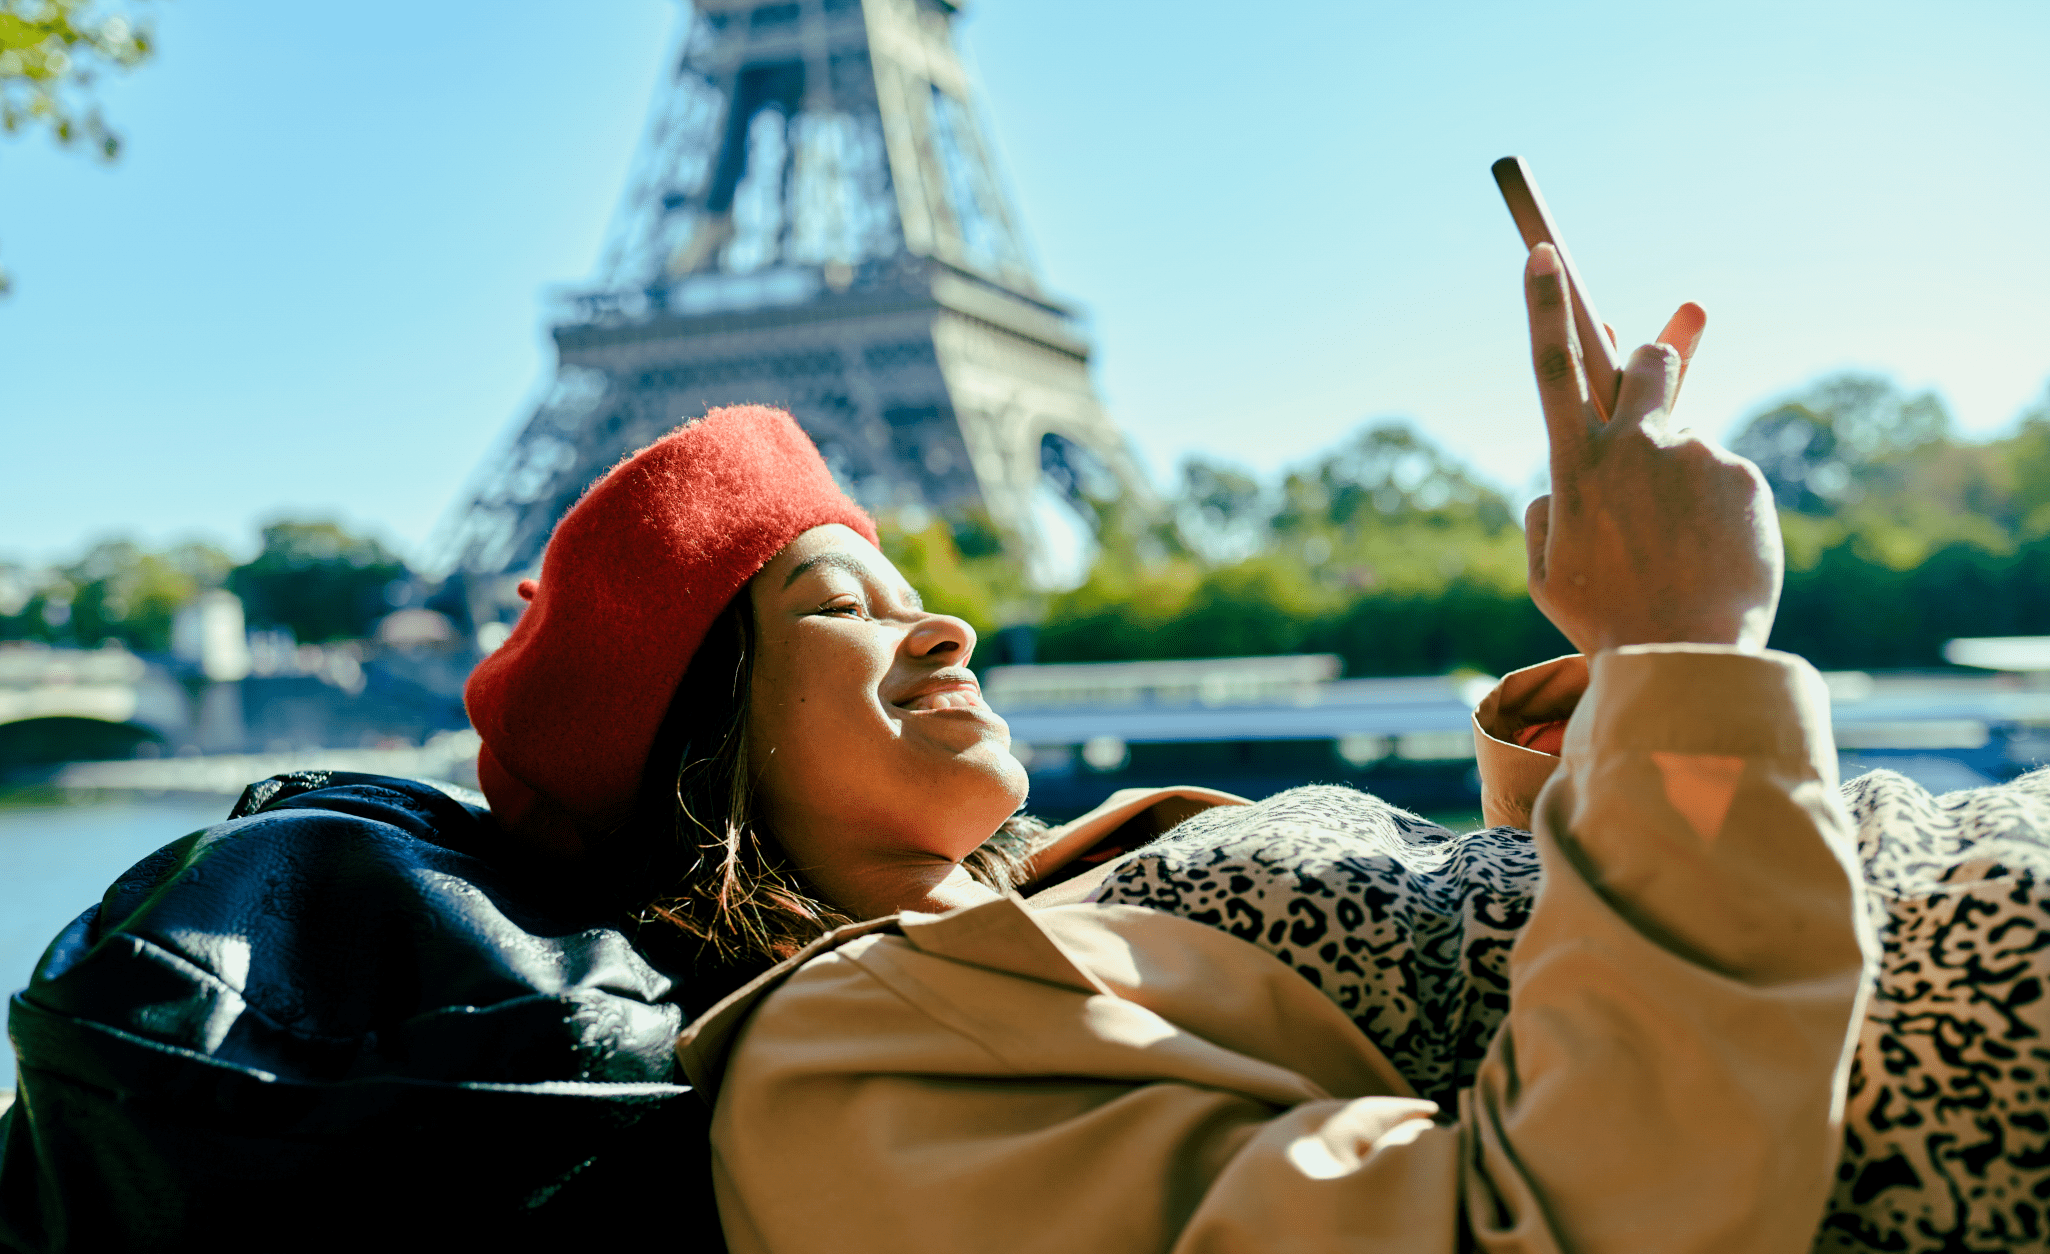 Woman on her phone in front of the Eiffel tower